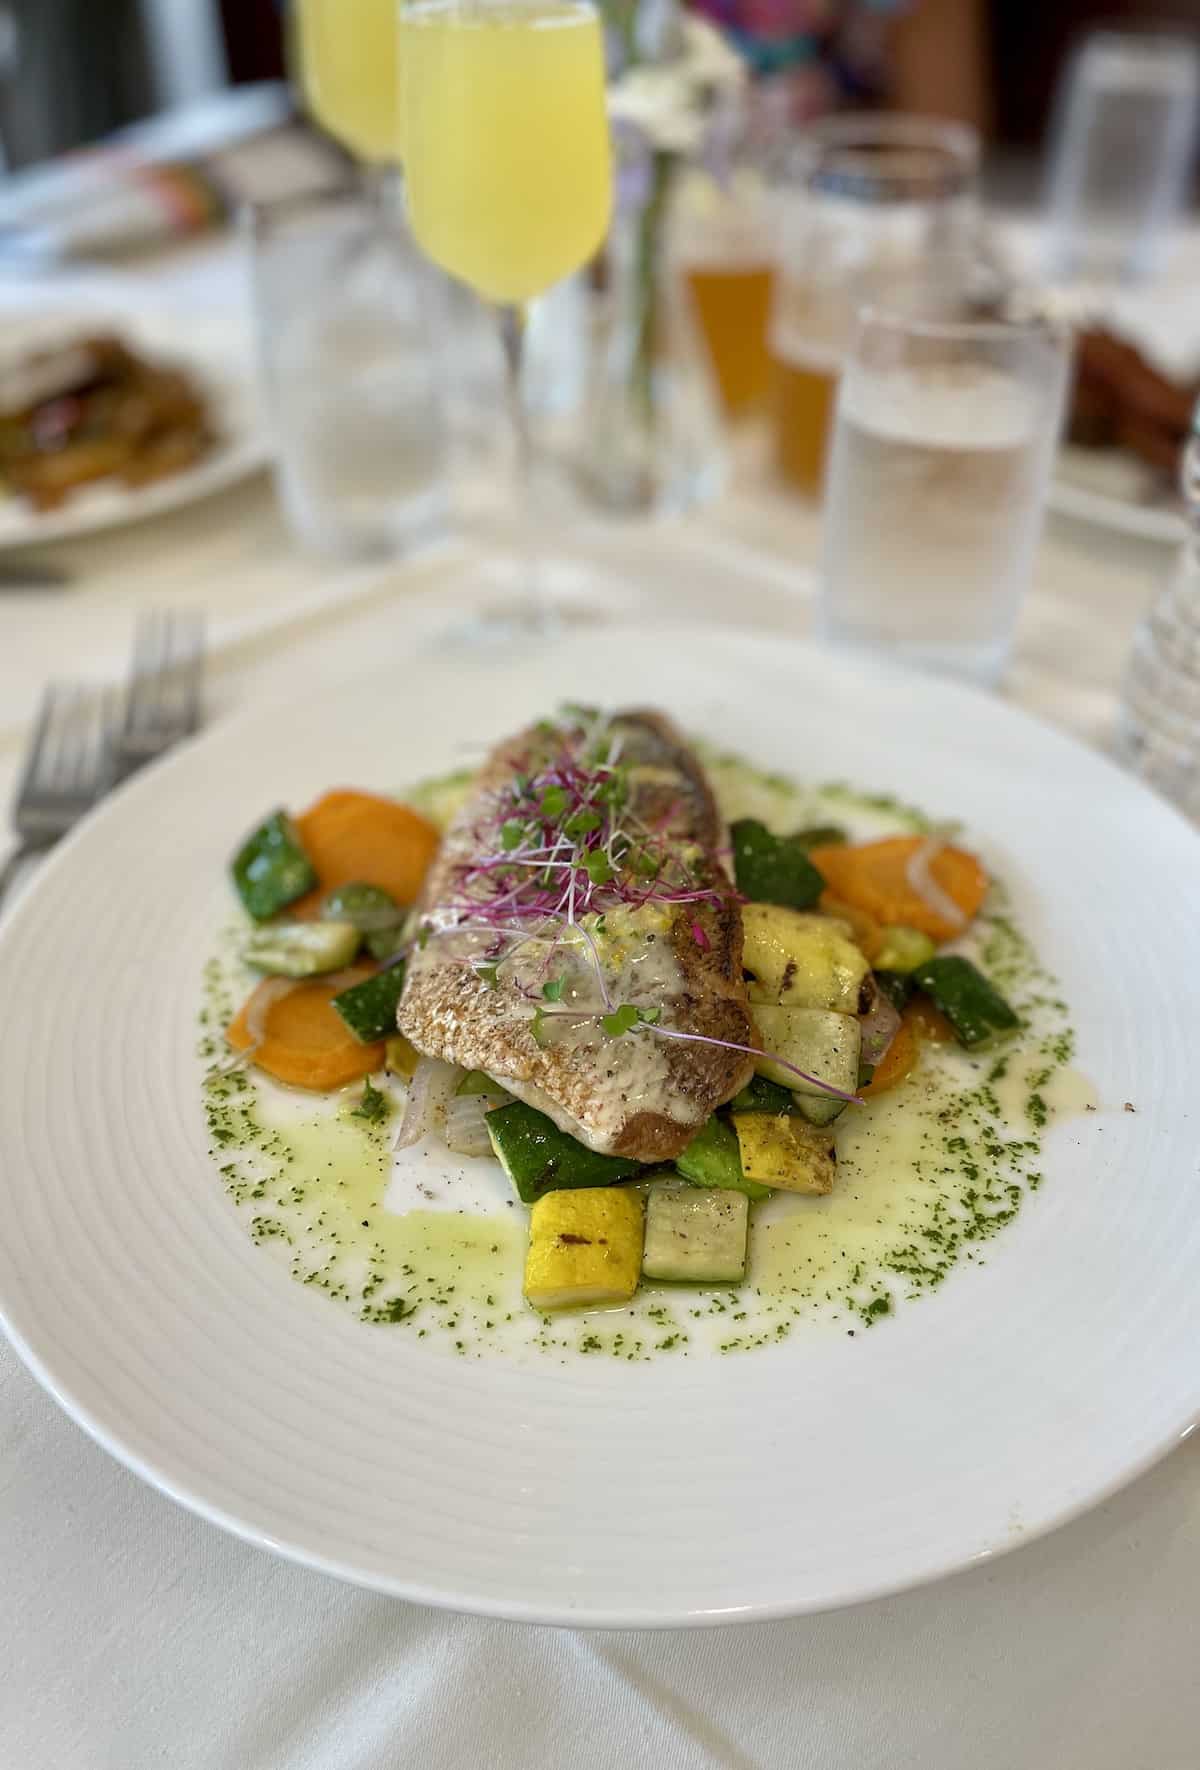 Snapper with lemon sauce and vegetables.